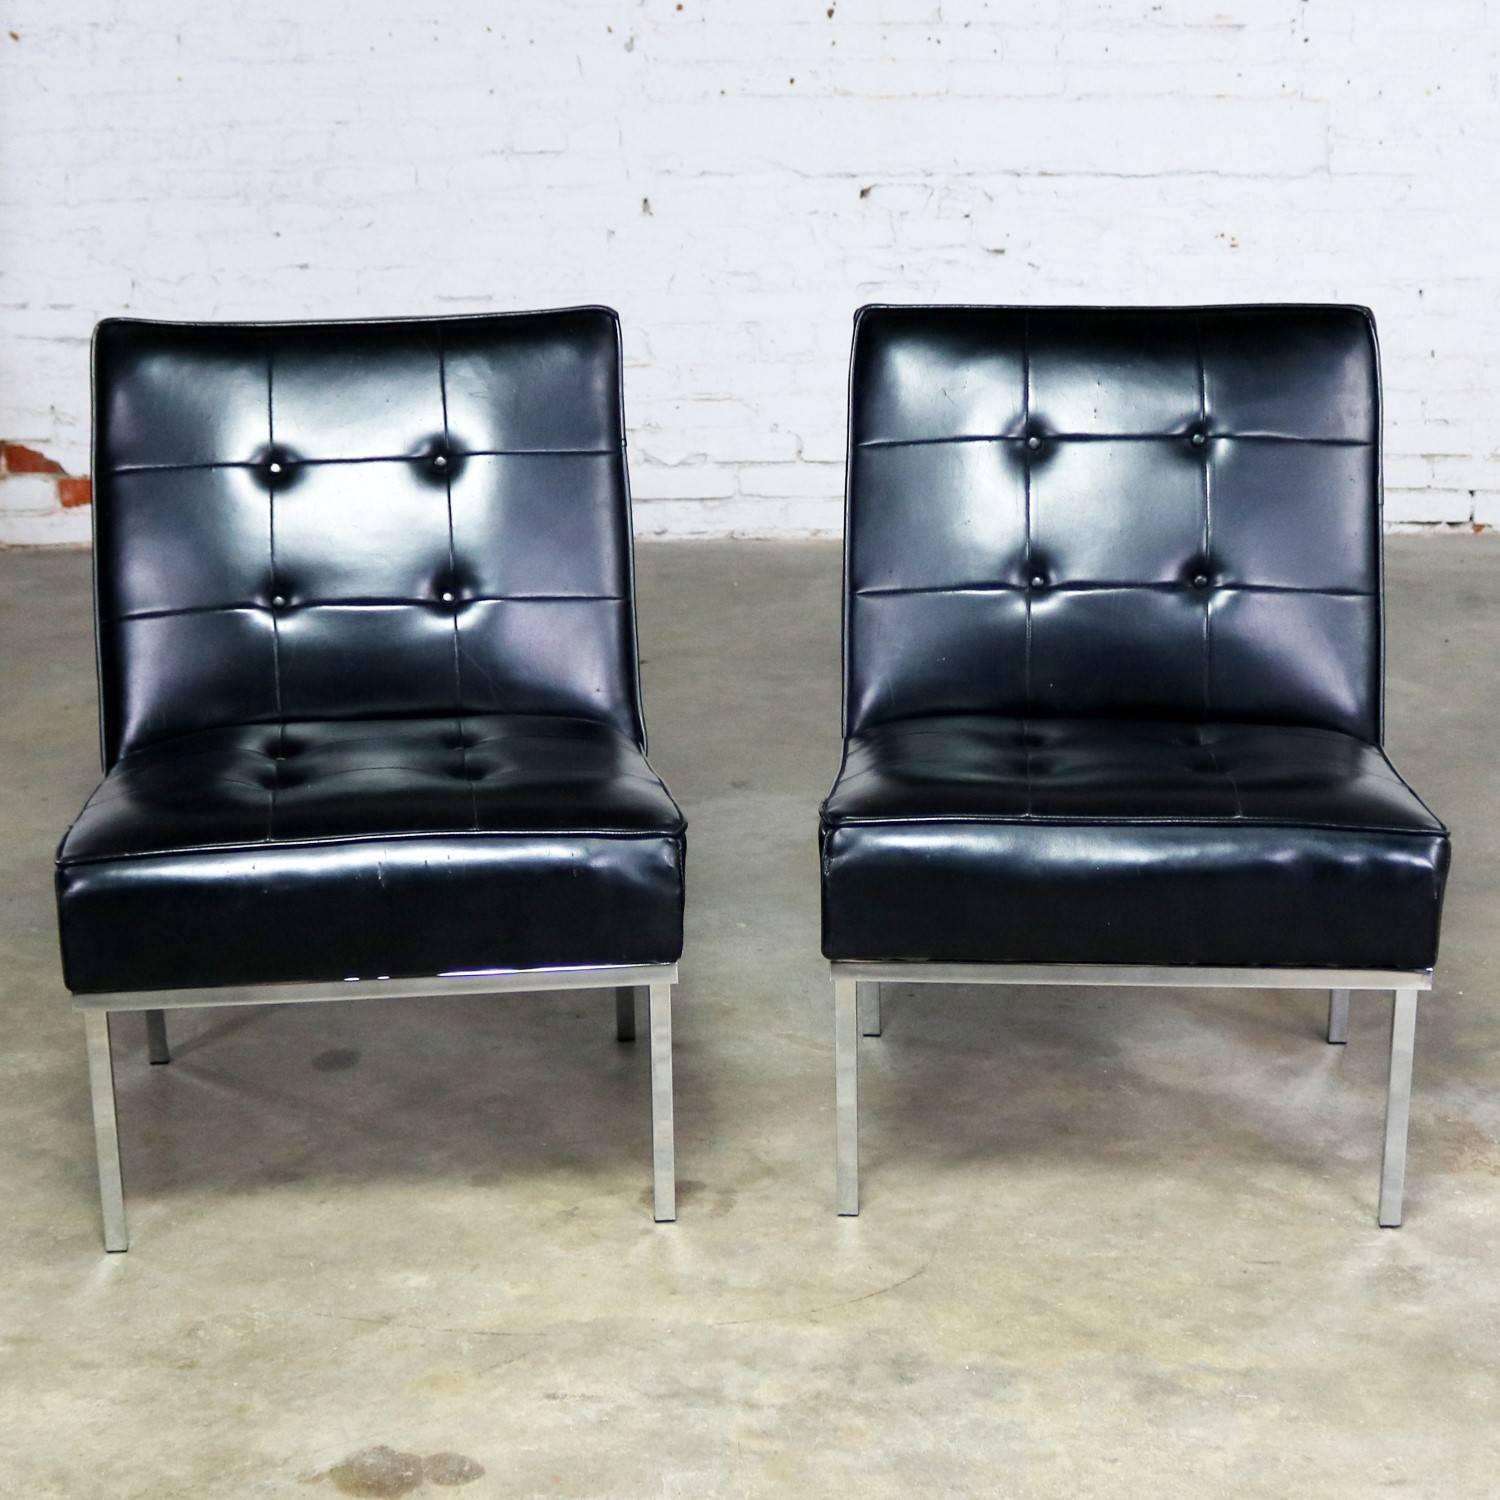 Awesome pair of Mid-Century Modern or MCM slipper chairs in black faux leather or Naugahyde by Paoli Chair Co. done in the style of Florence Knoll. Original tag on one chair dated 1968. They are in good original condition. There are a few repaired